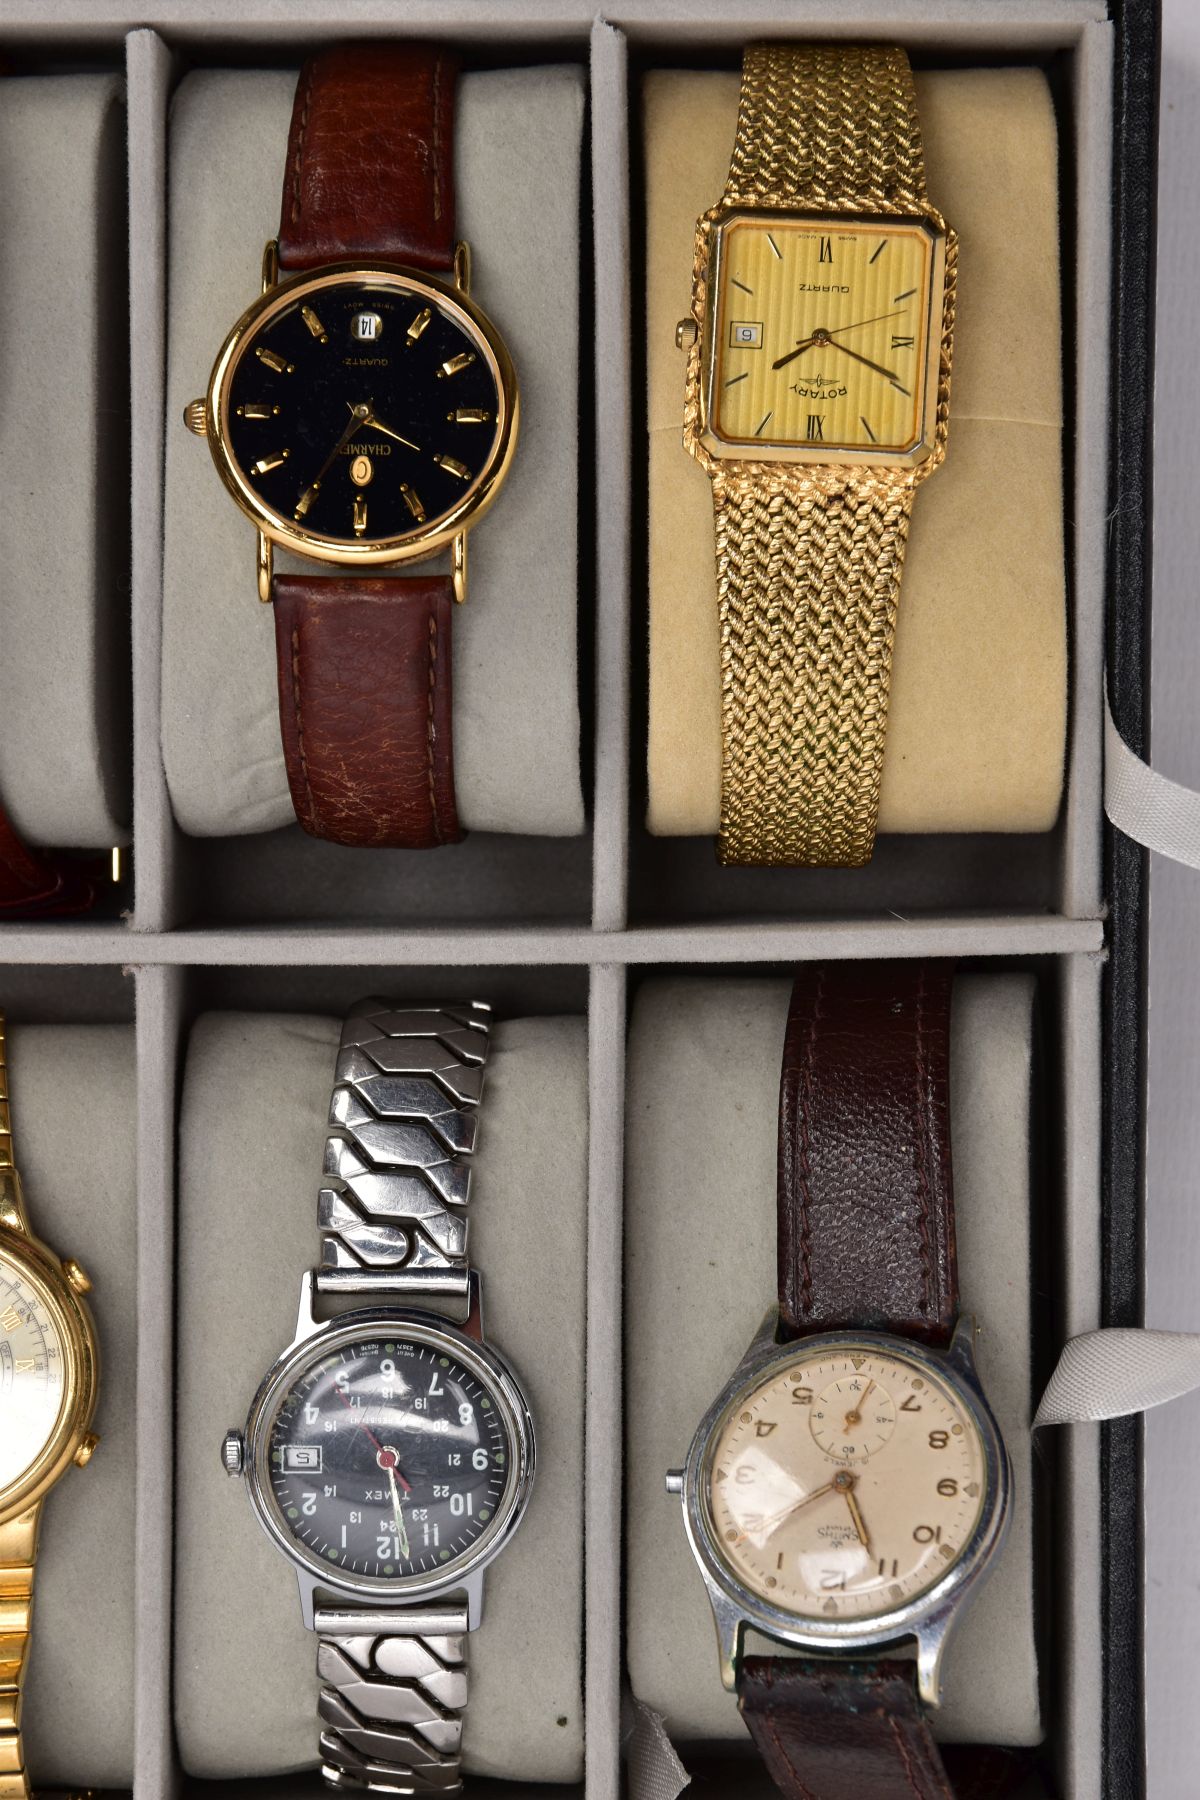 A WATCH DISPLAY CASE OF GENTS WRISTWATCHES, a black and glass panelled watch display case, with - Image 4 of 4